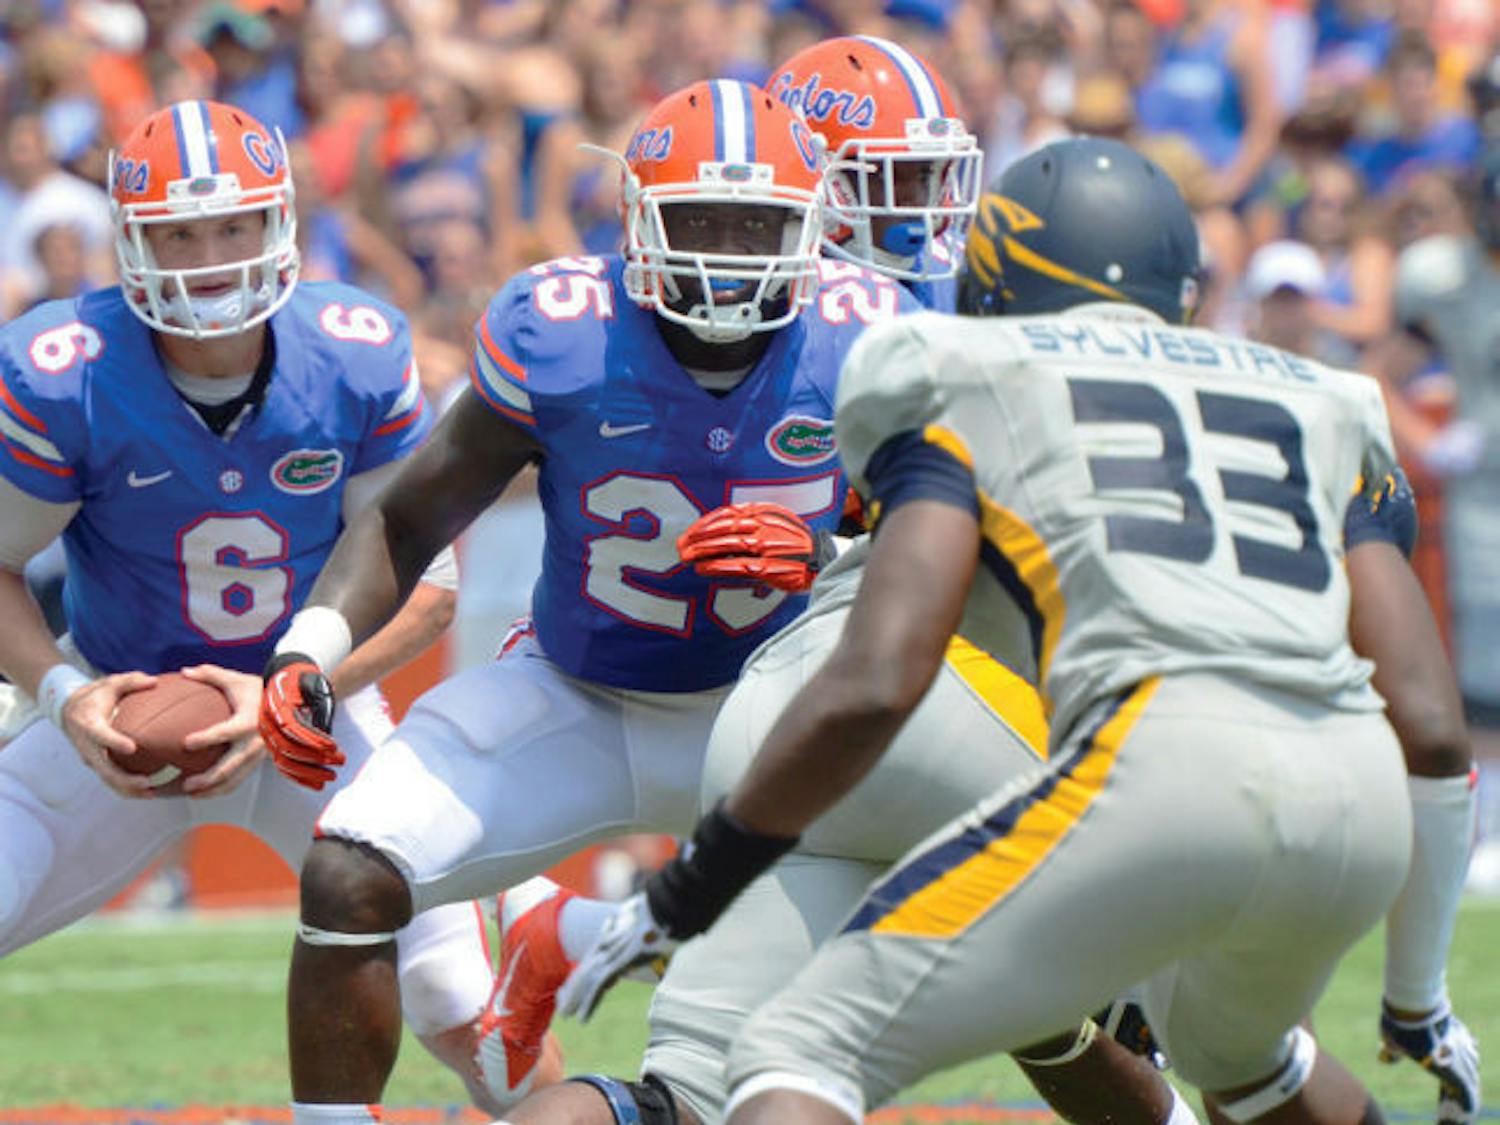 Junior fullback Gideon Ajagbe (25) blocks during Florida’s 24-6 victory against Toledo on Saturday in Ben Hill Griffin Stadium. Ajagbe caught two passes for 16 yards in the game.